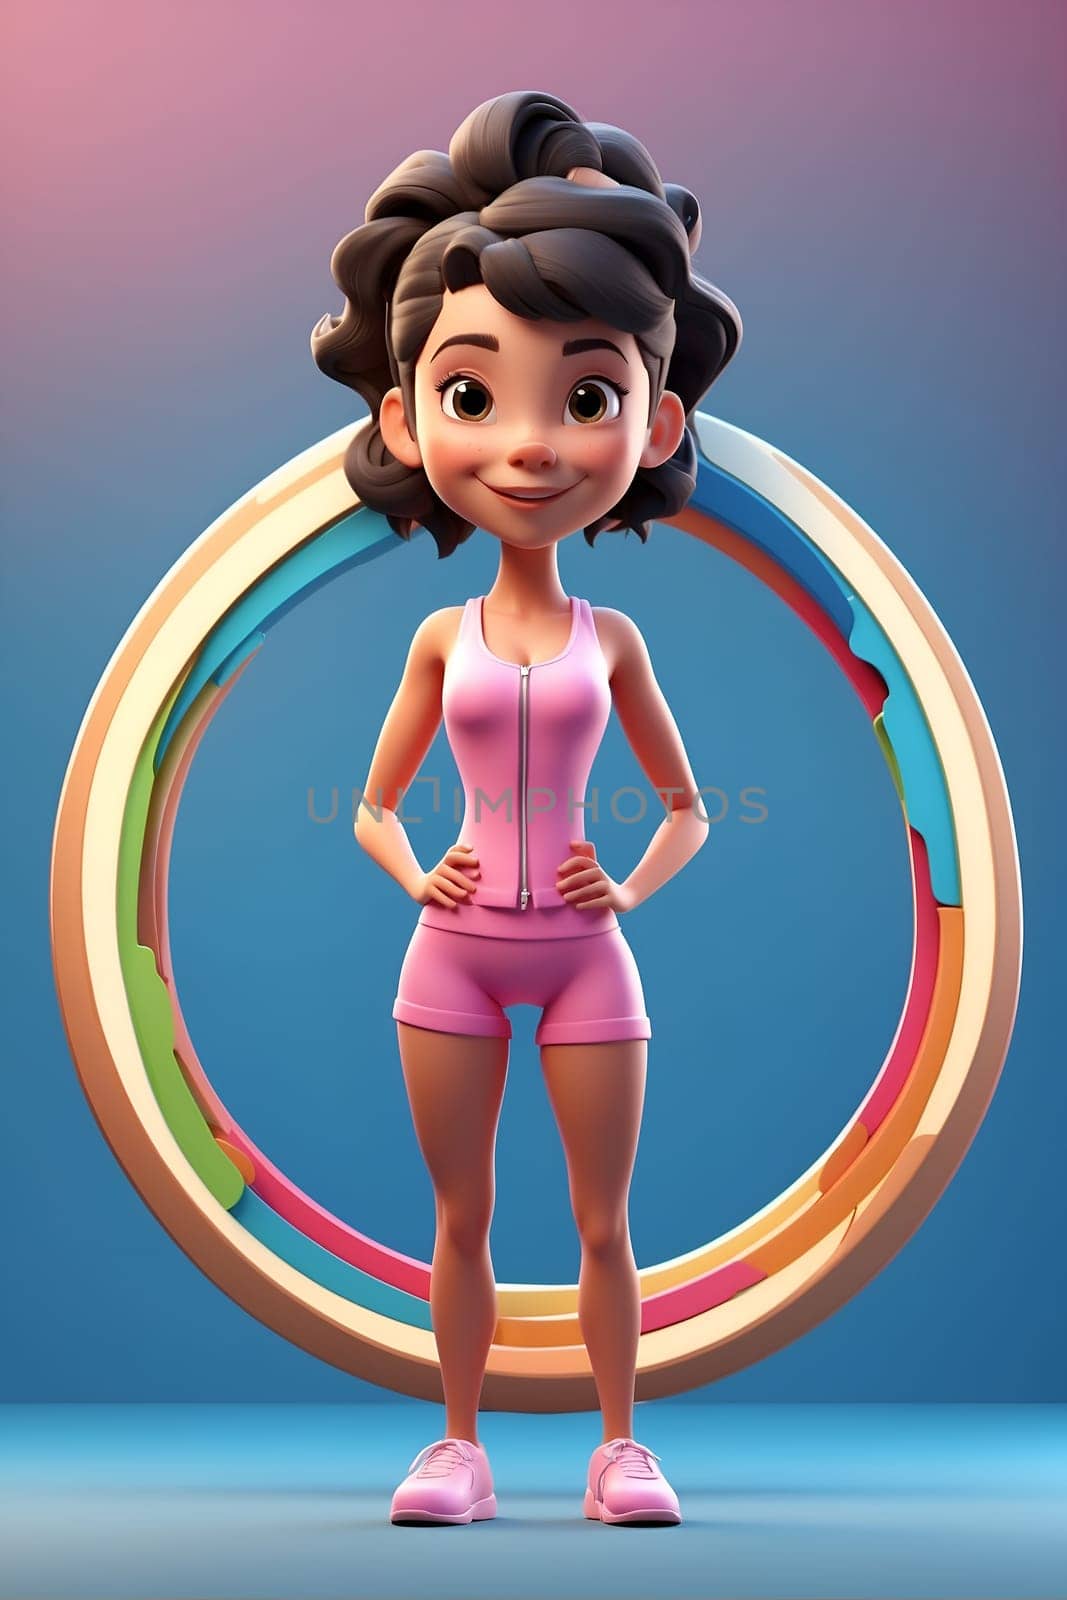 A woman dressed in a pink outfit poses in front of a circle structure.